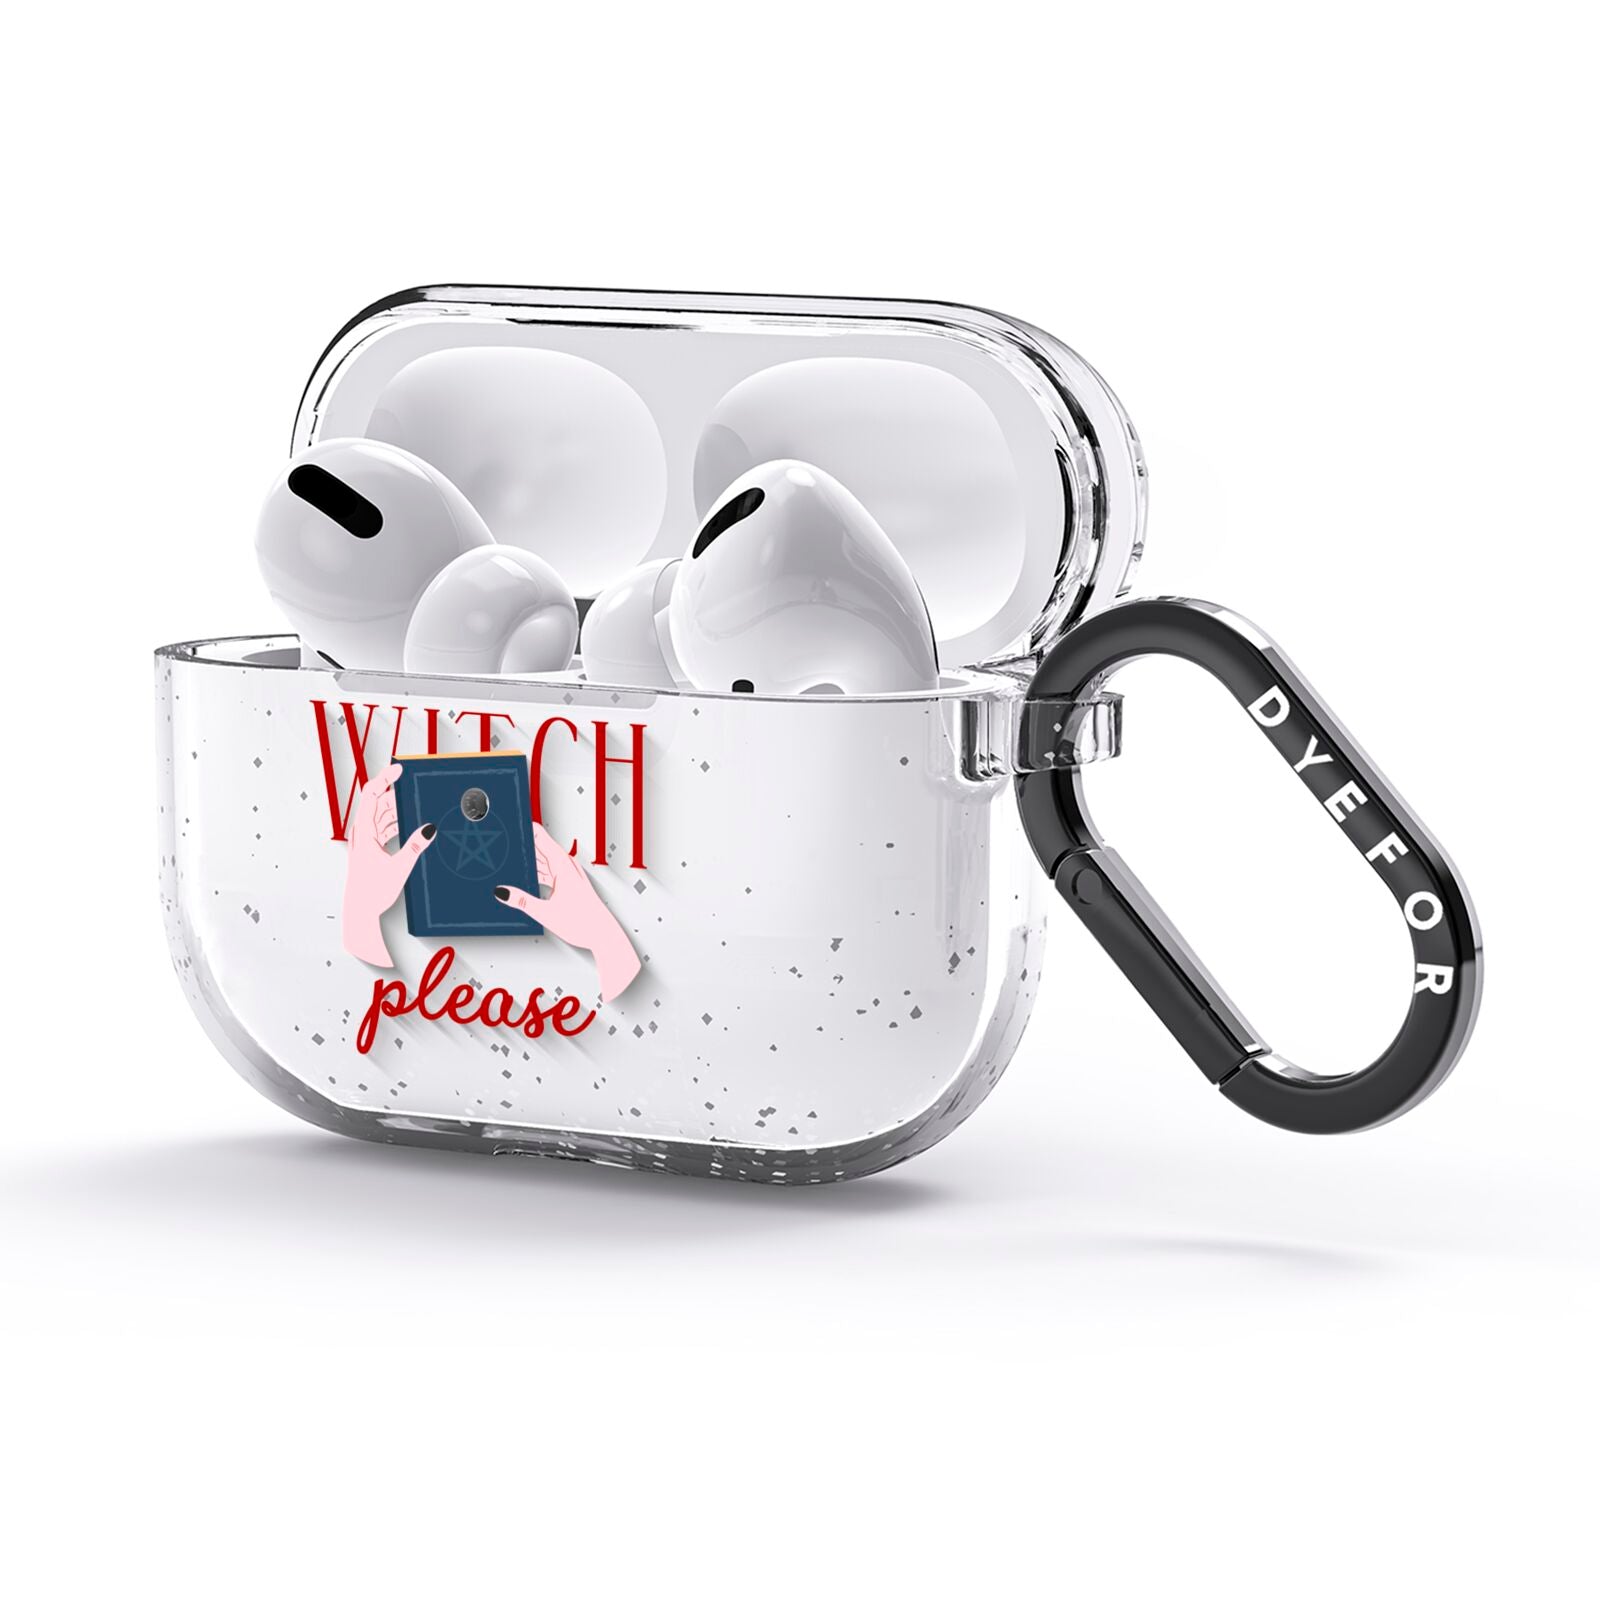 Witty Witch Illustration AirPods Glitter Case 3rd Gen Side Image